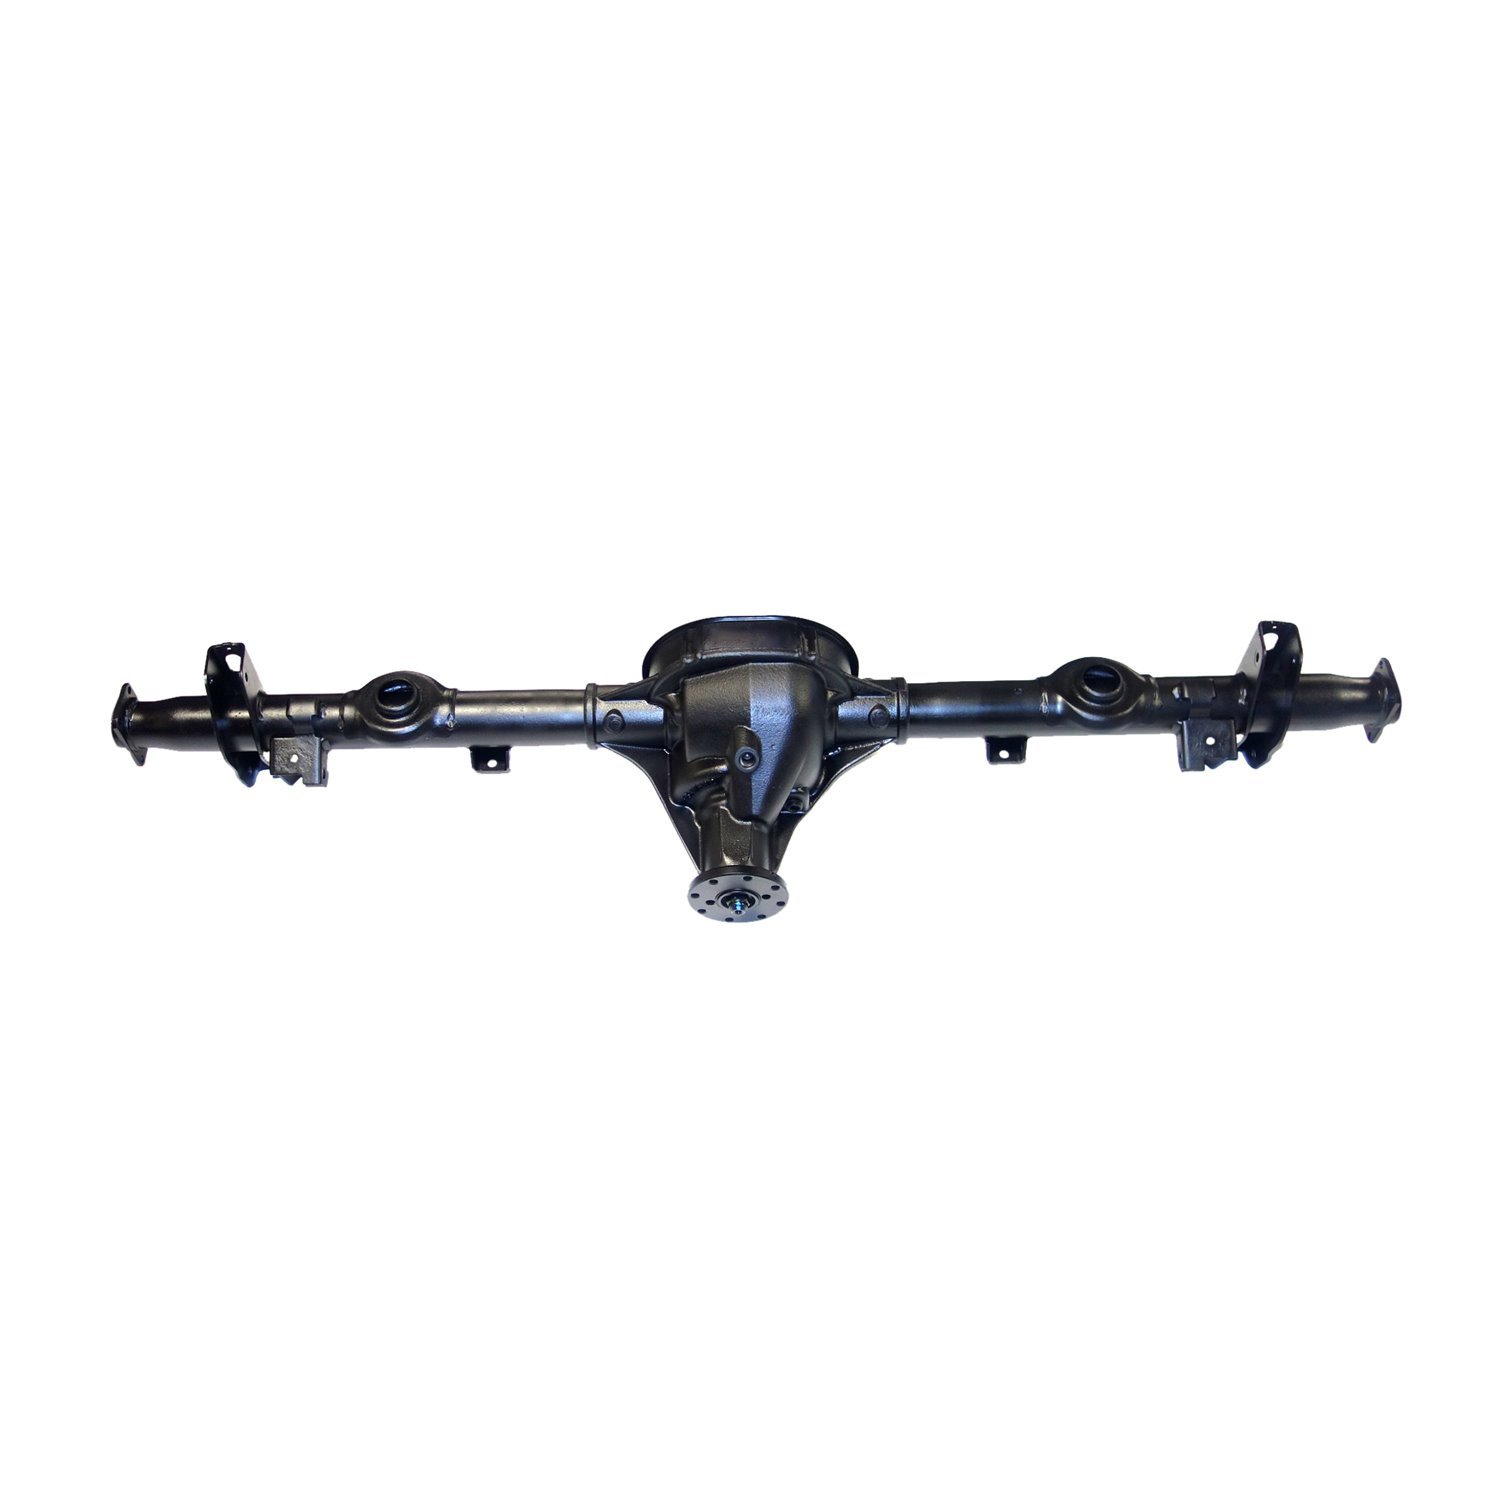 Remanufactured Axle Assy 8.8" 01-02 Crown Vic, W/O ABS W/H&ling Package, 3.27 Raito, Open